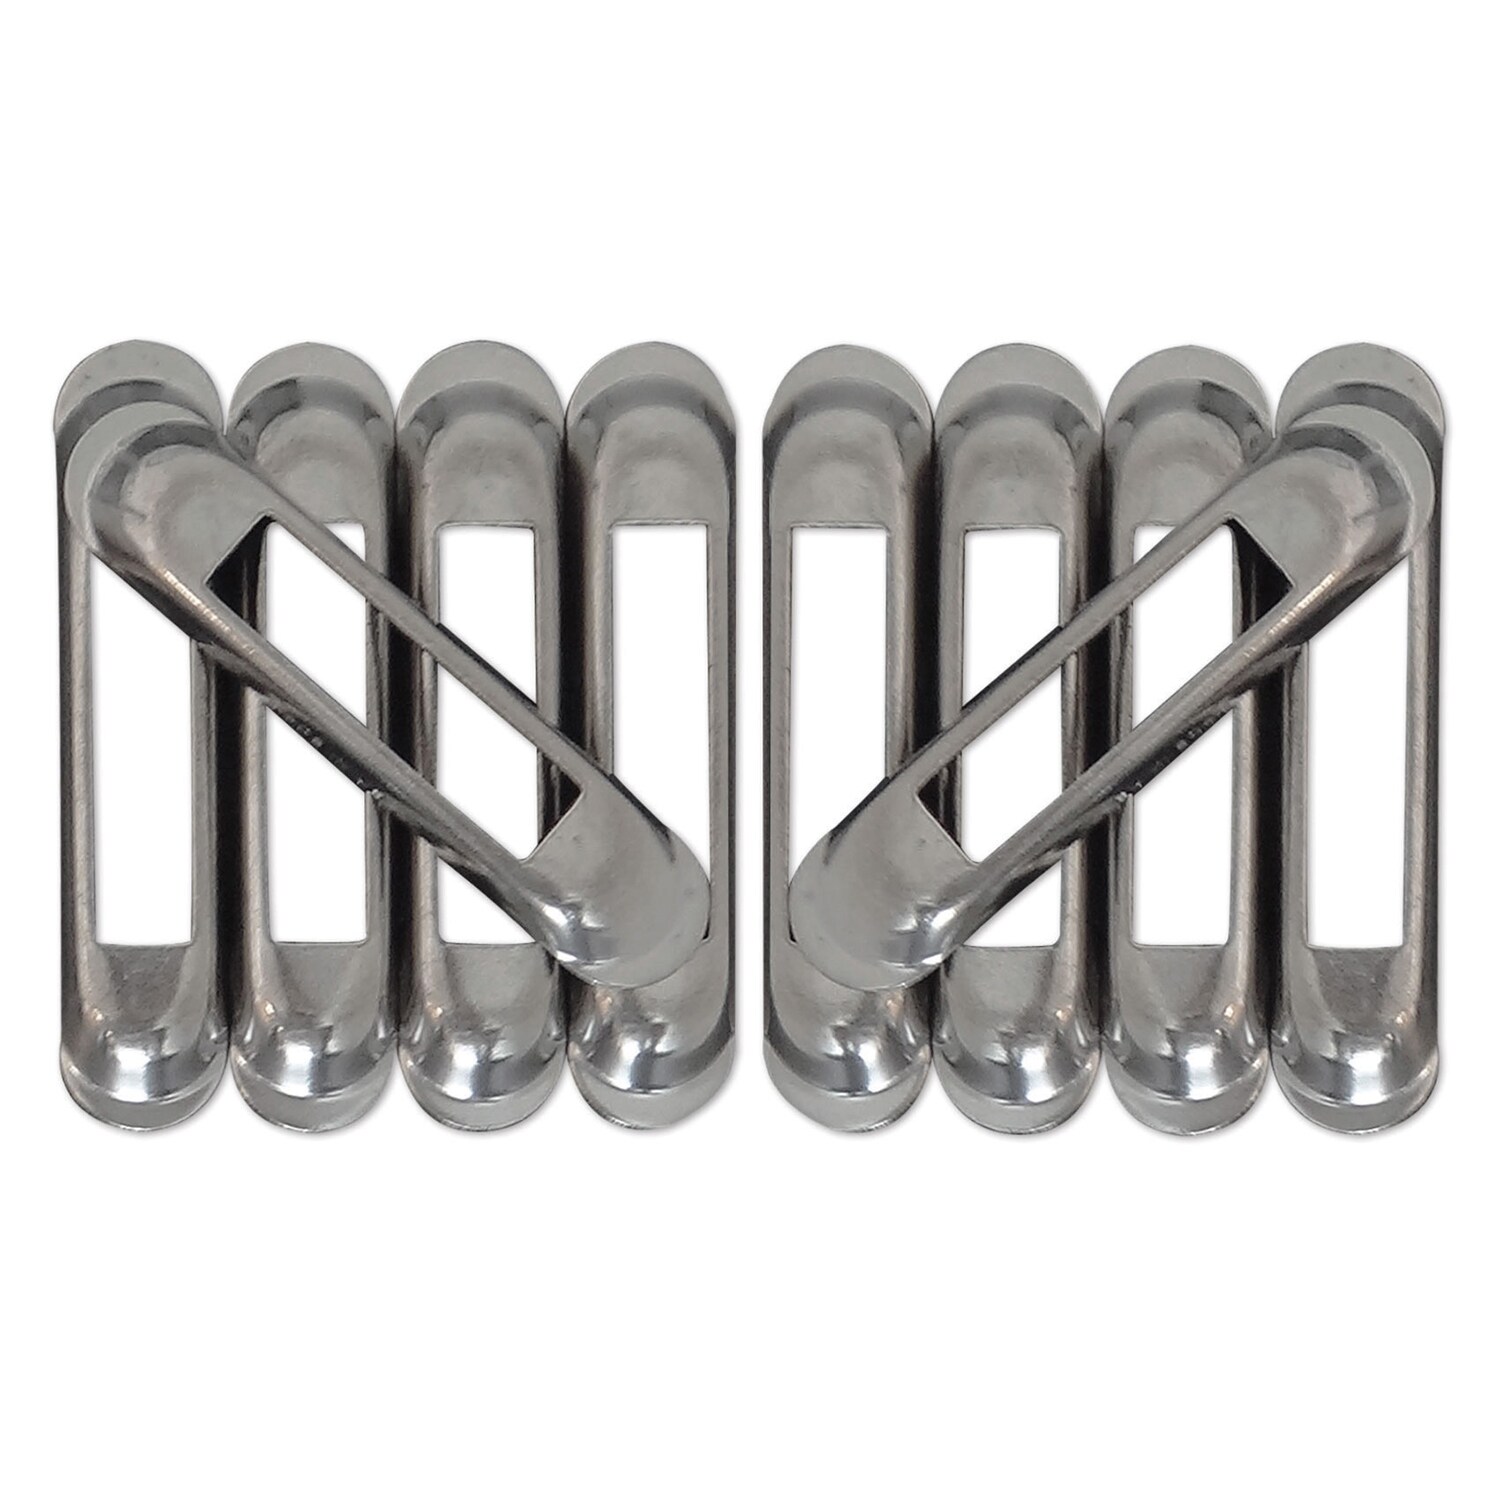 Weld-On Snap-Loc E-Track Single Strap Anchor 10-Pack (Zinc)